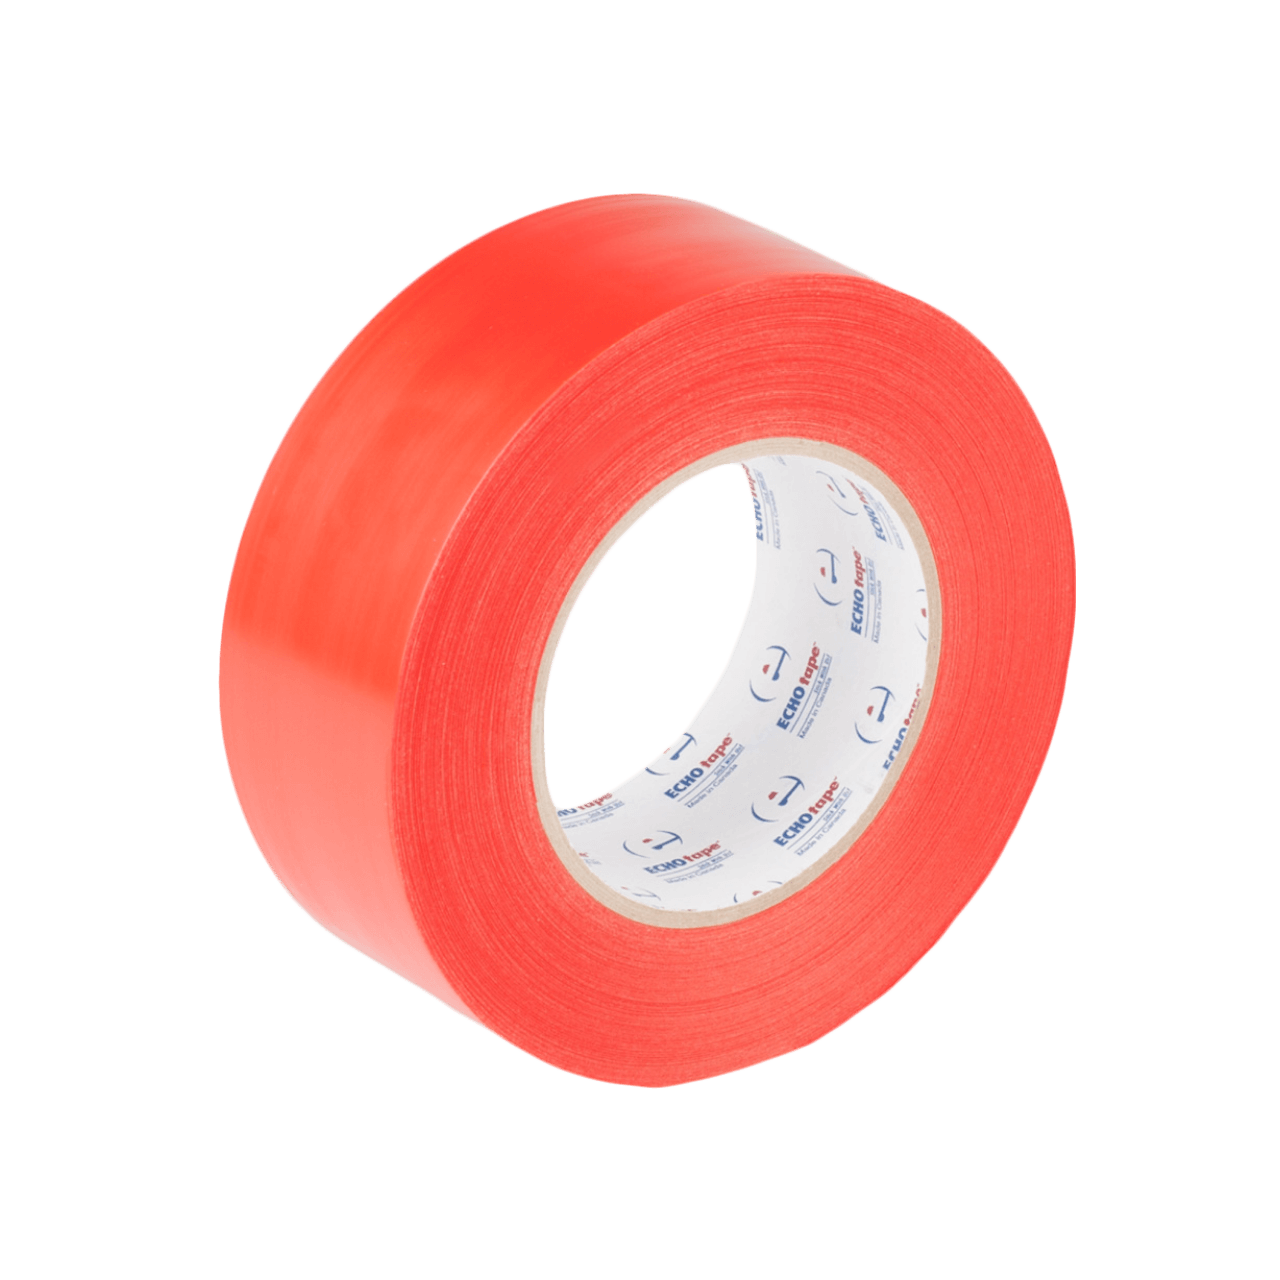 Stuck-O-Tape - Multi-Purpose Polyethylene Tape - Indoor/Outdoor Masking Surface Protection - Clean Release Low Residue UV Resistant - Single Roll